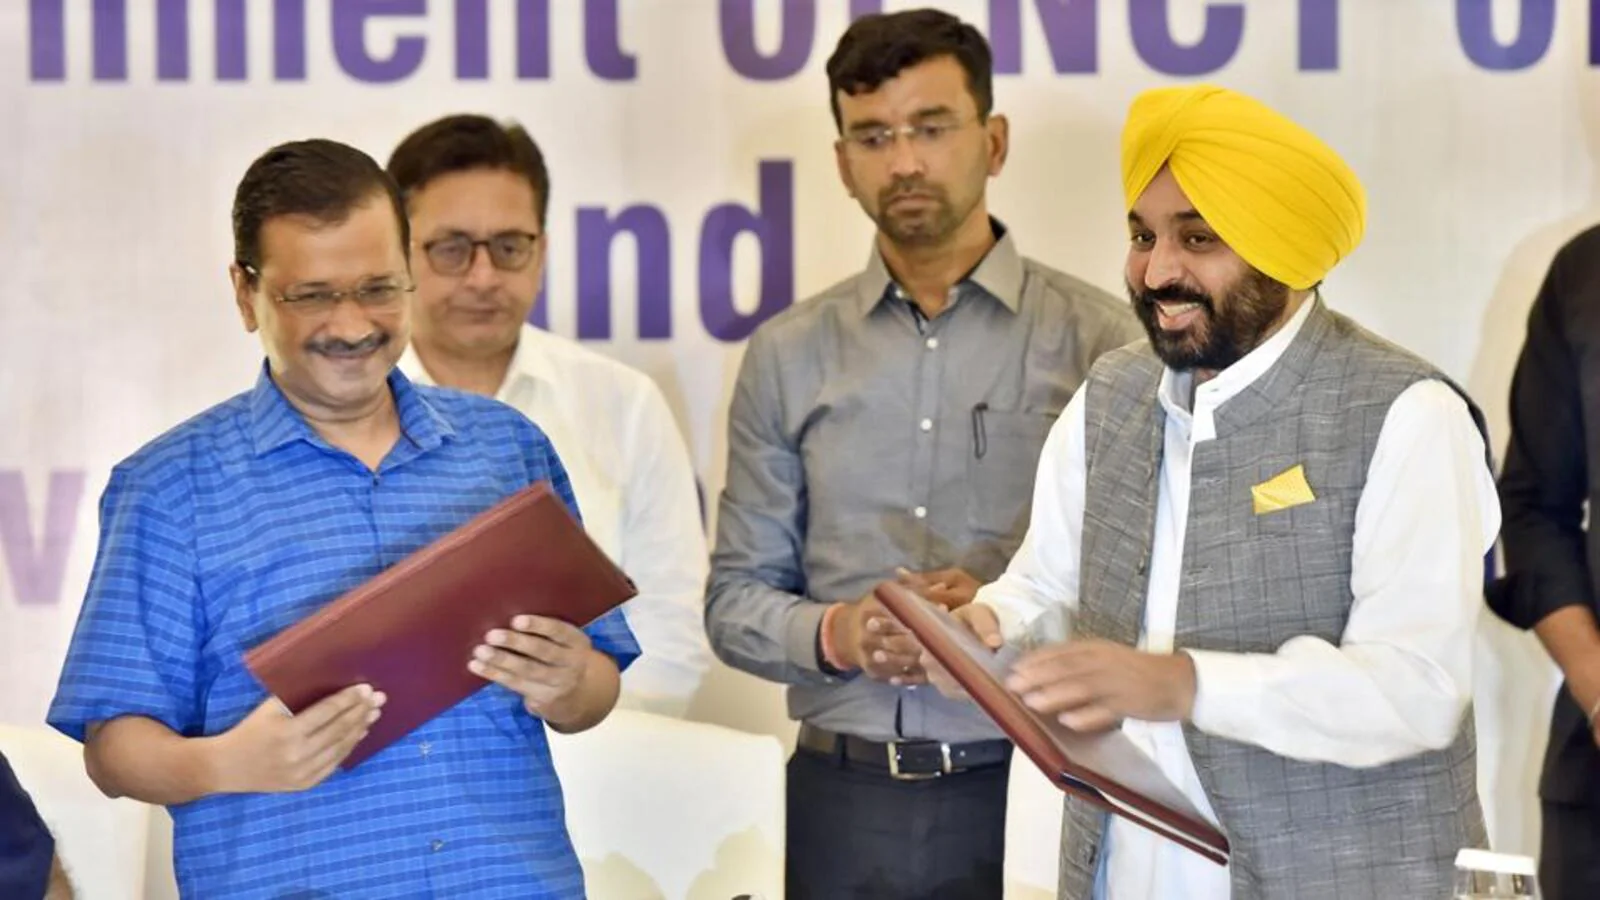 Punjab signs knowledge-sharing pact with Delhi; Oppn slams it